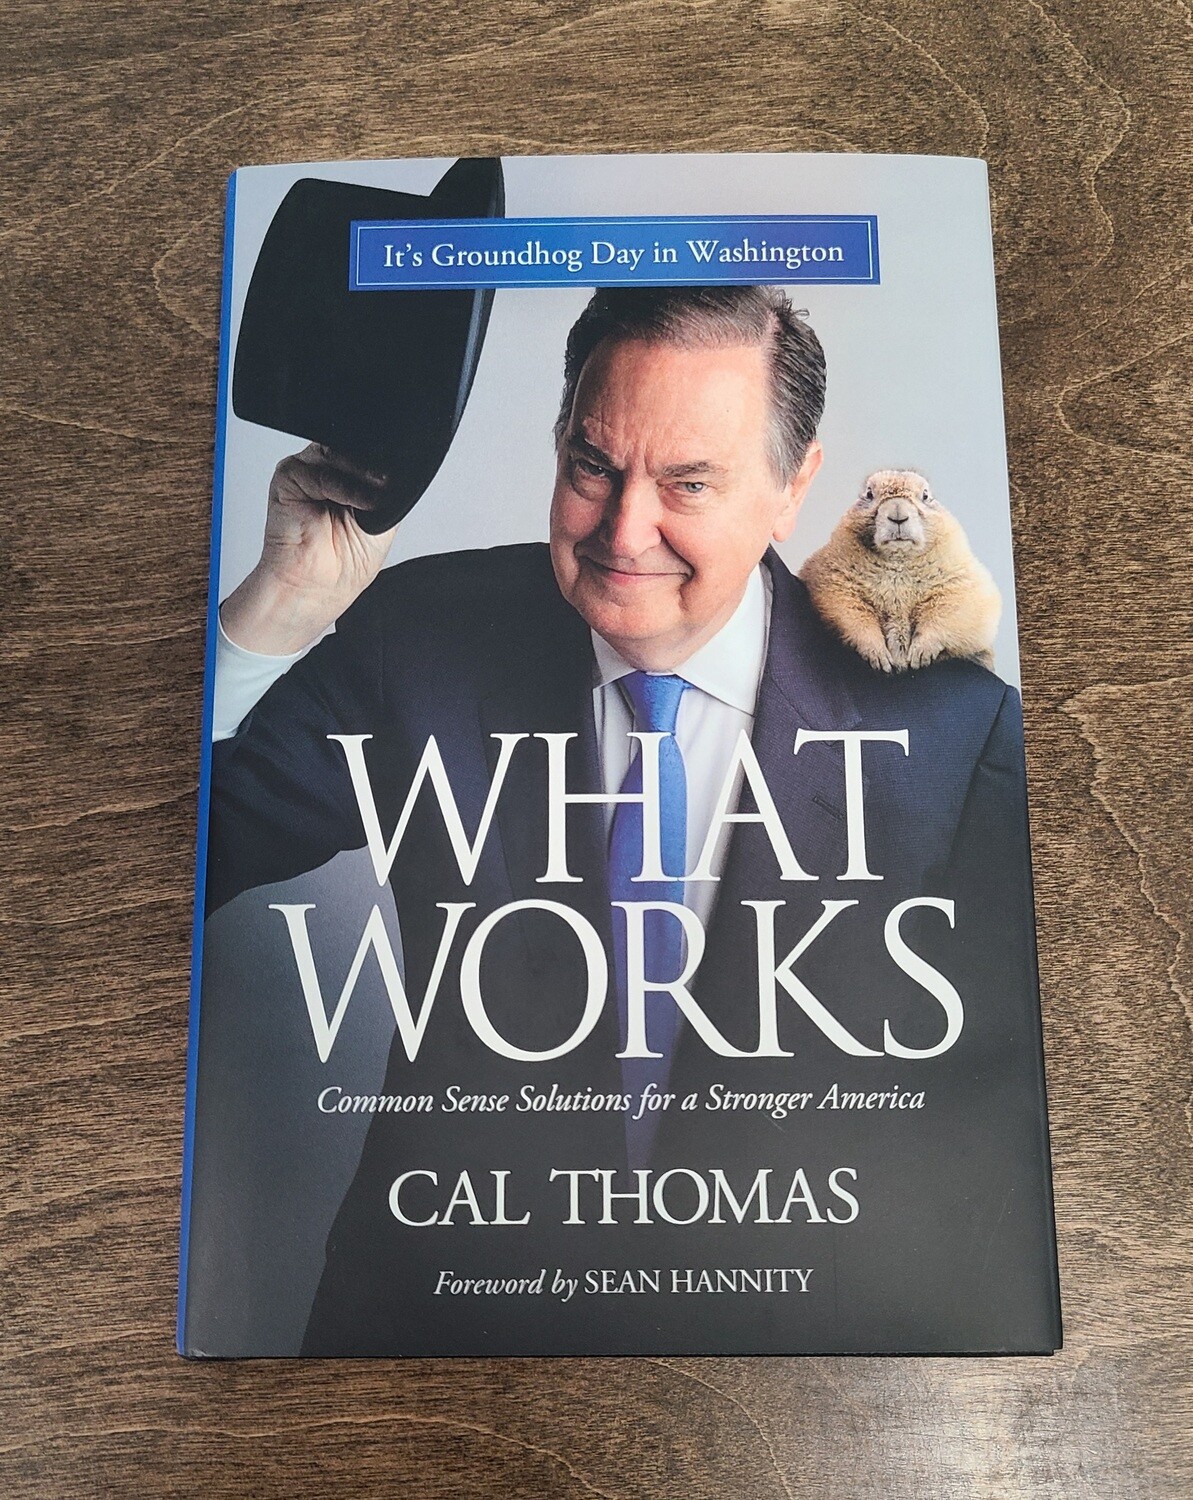 What Works by Cal Thomas